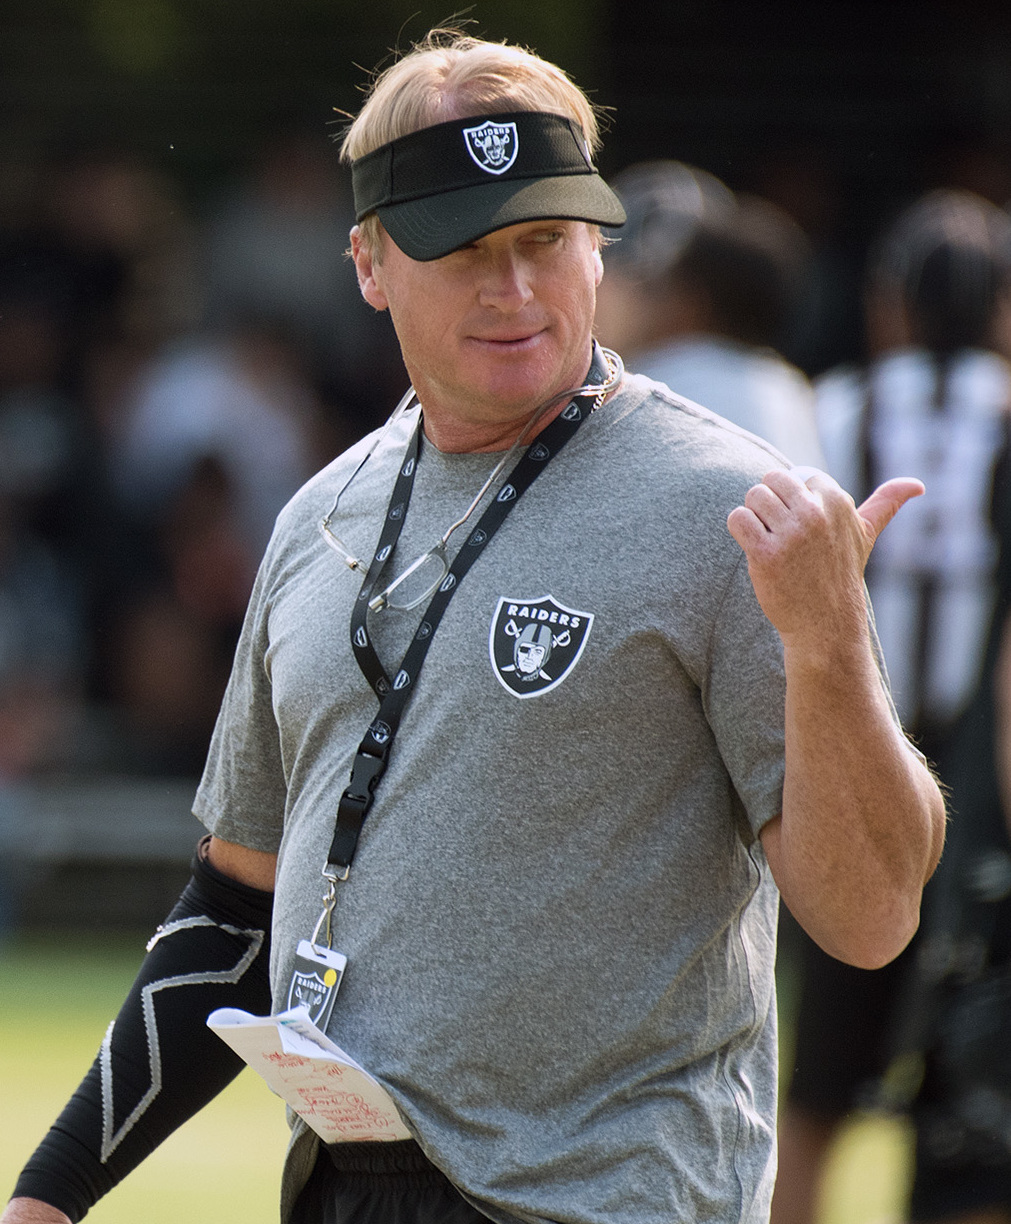 Raiders’ Gruden to bro Jay: ‘Welcome to the club’